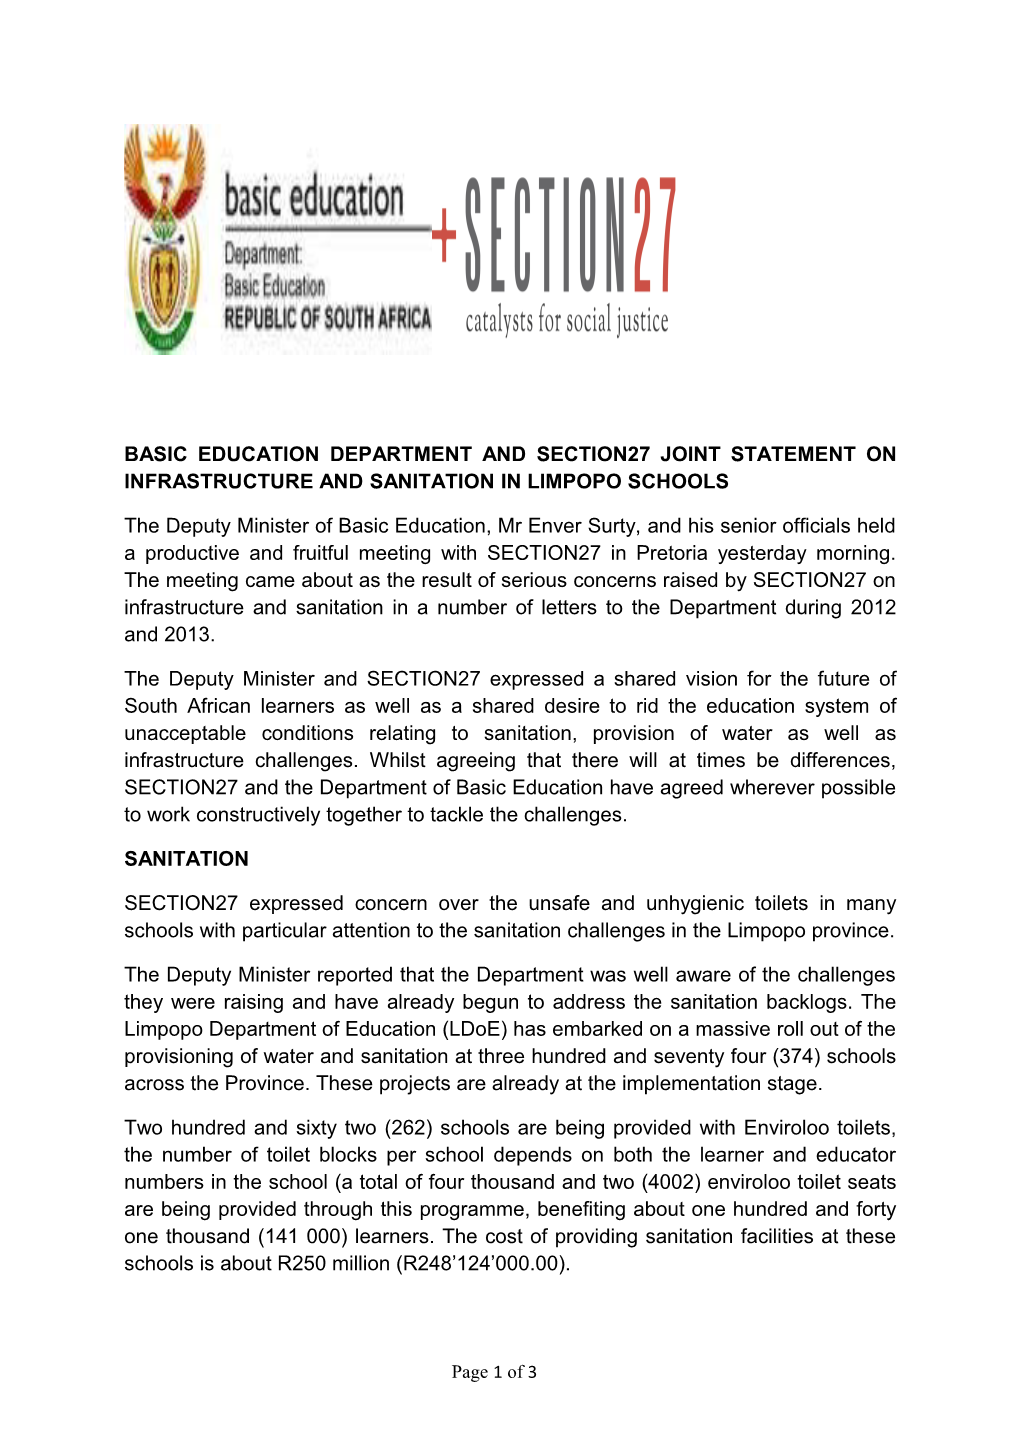 Basic Education Department and Section27 Joint Statement on Infrastructure and Sanitation